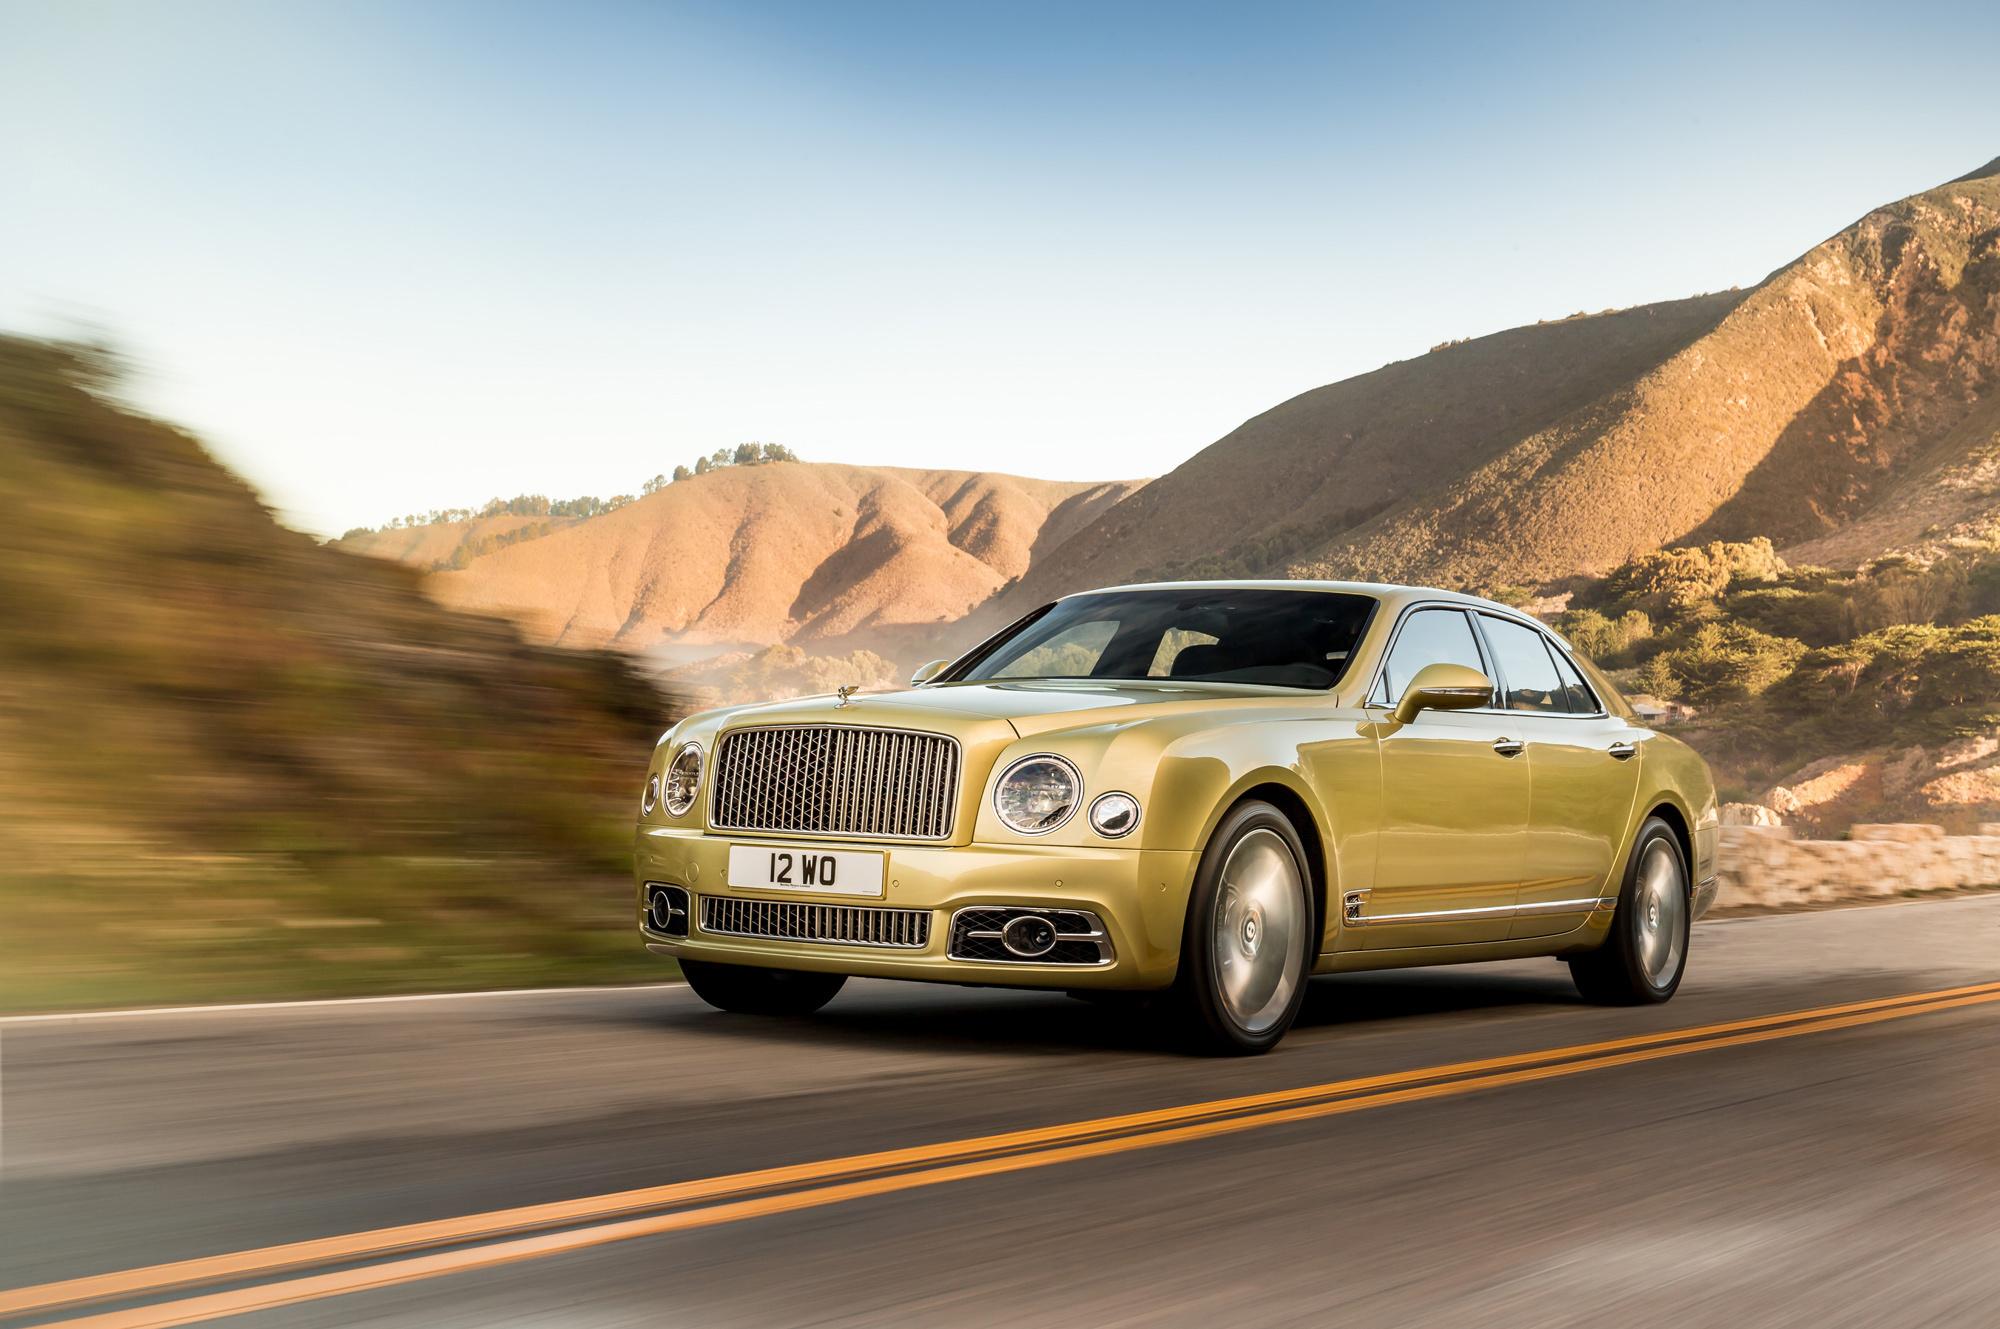 Bentley Mulsanne Wallpaper Image Photo Picture Background